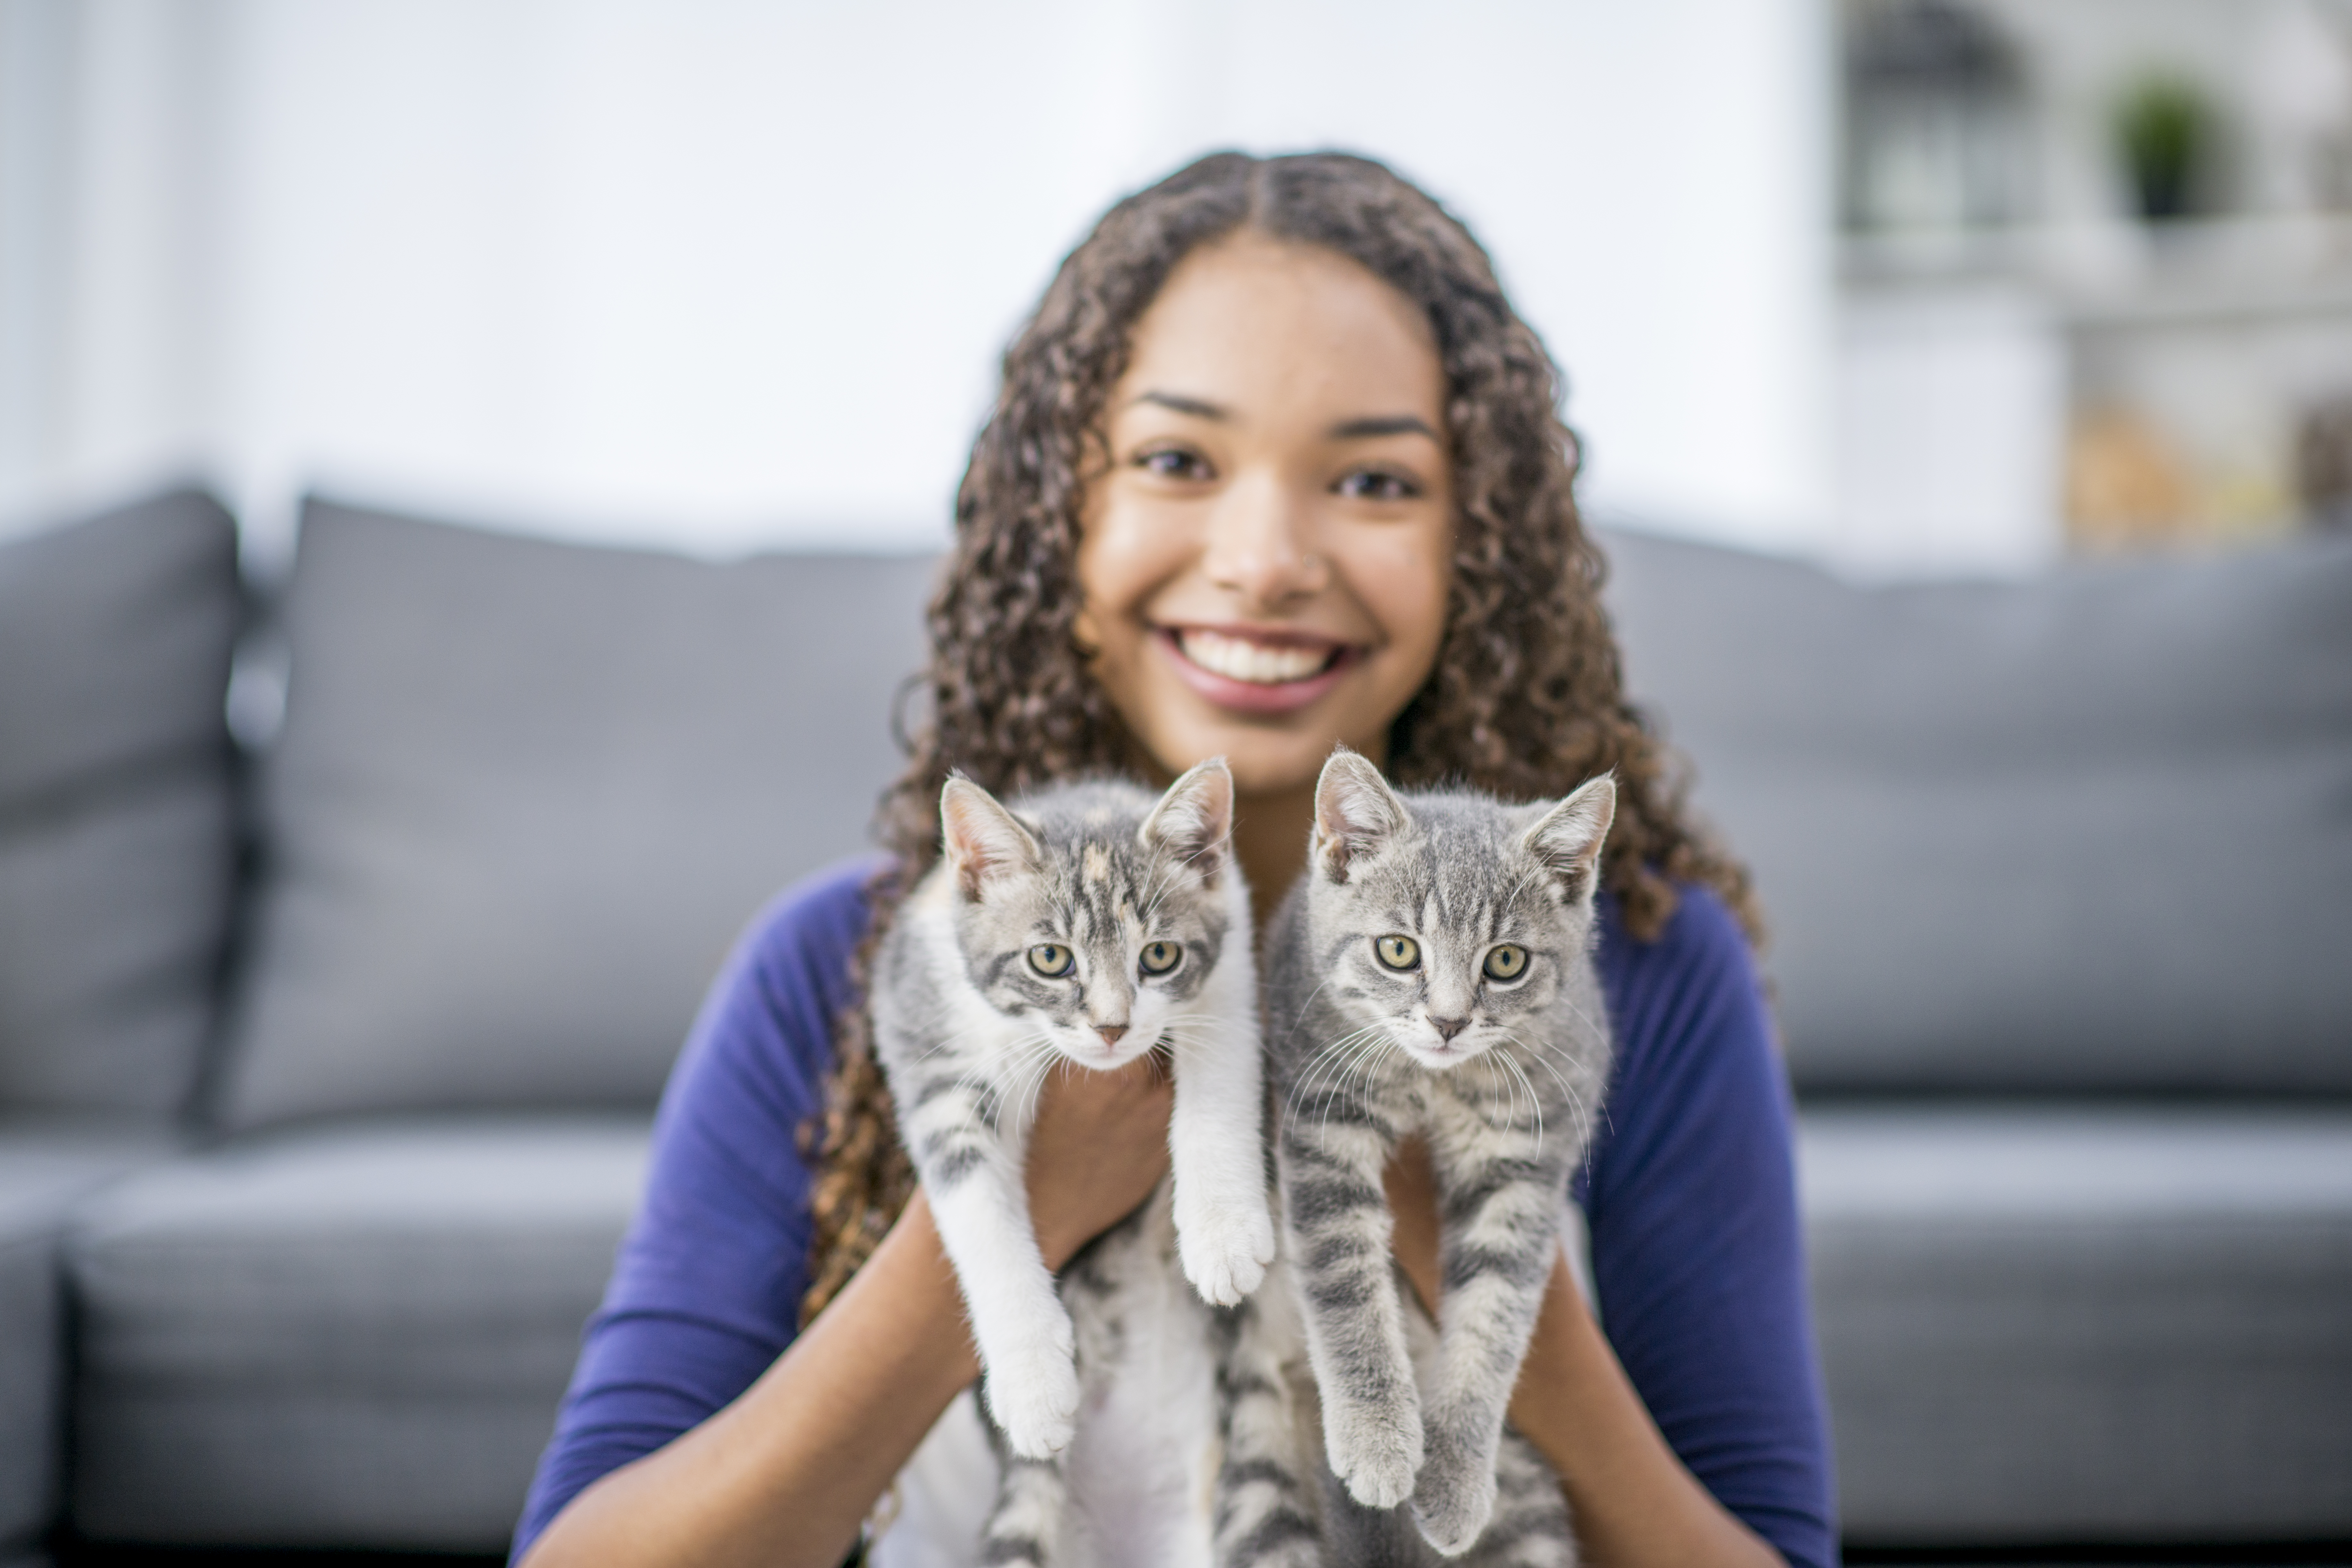 A girl of African descent is in her living room. She is holding up her two newly-adopted kittens, and smiling at the camera.